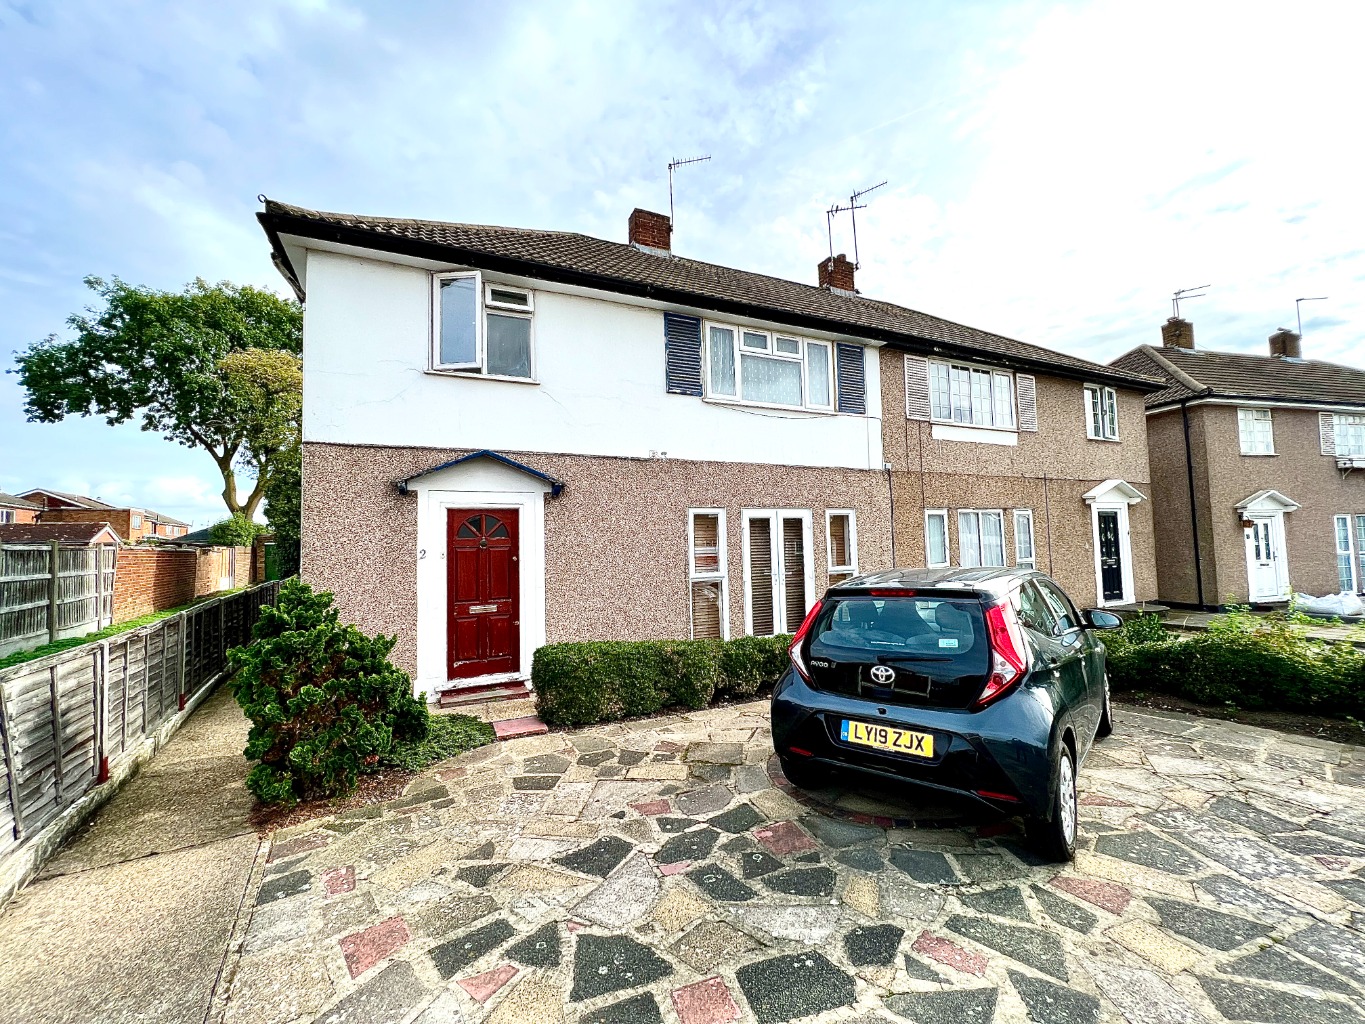 Offered with no forward chain, Beaumont Gibbs are offering for sale this two bedroomed first floor purpose built maisonette. Situated in a cul-de-sac location, approximately half to three quarters of a mile from Bexleyheath mainline station and will local bus routes and shops close at hand.